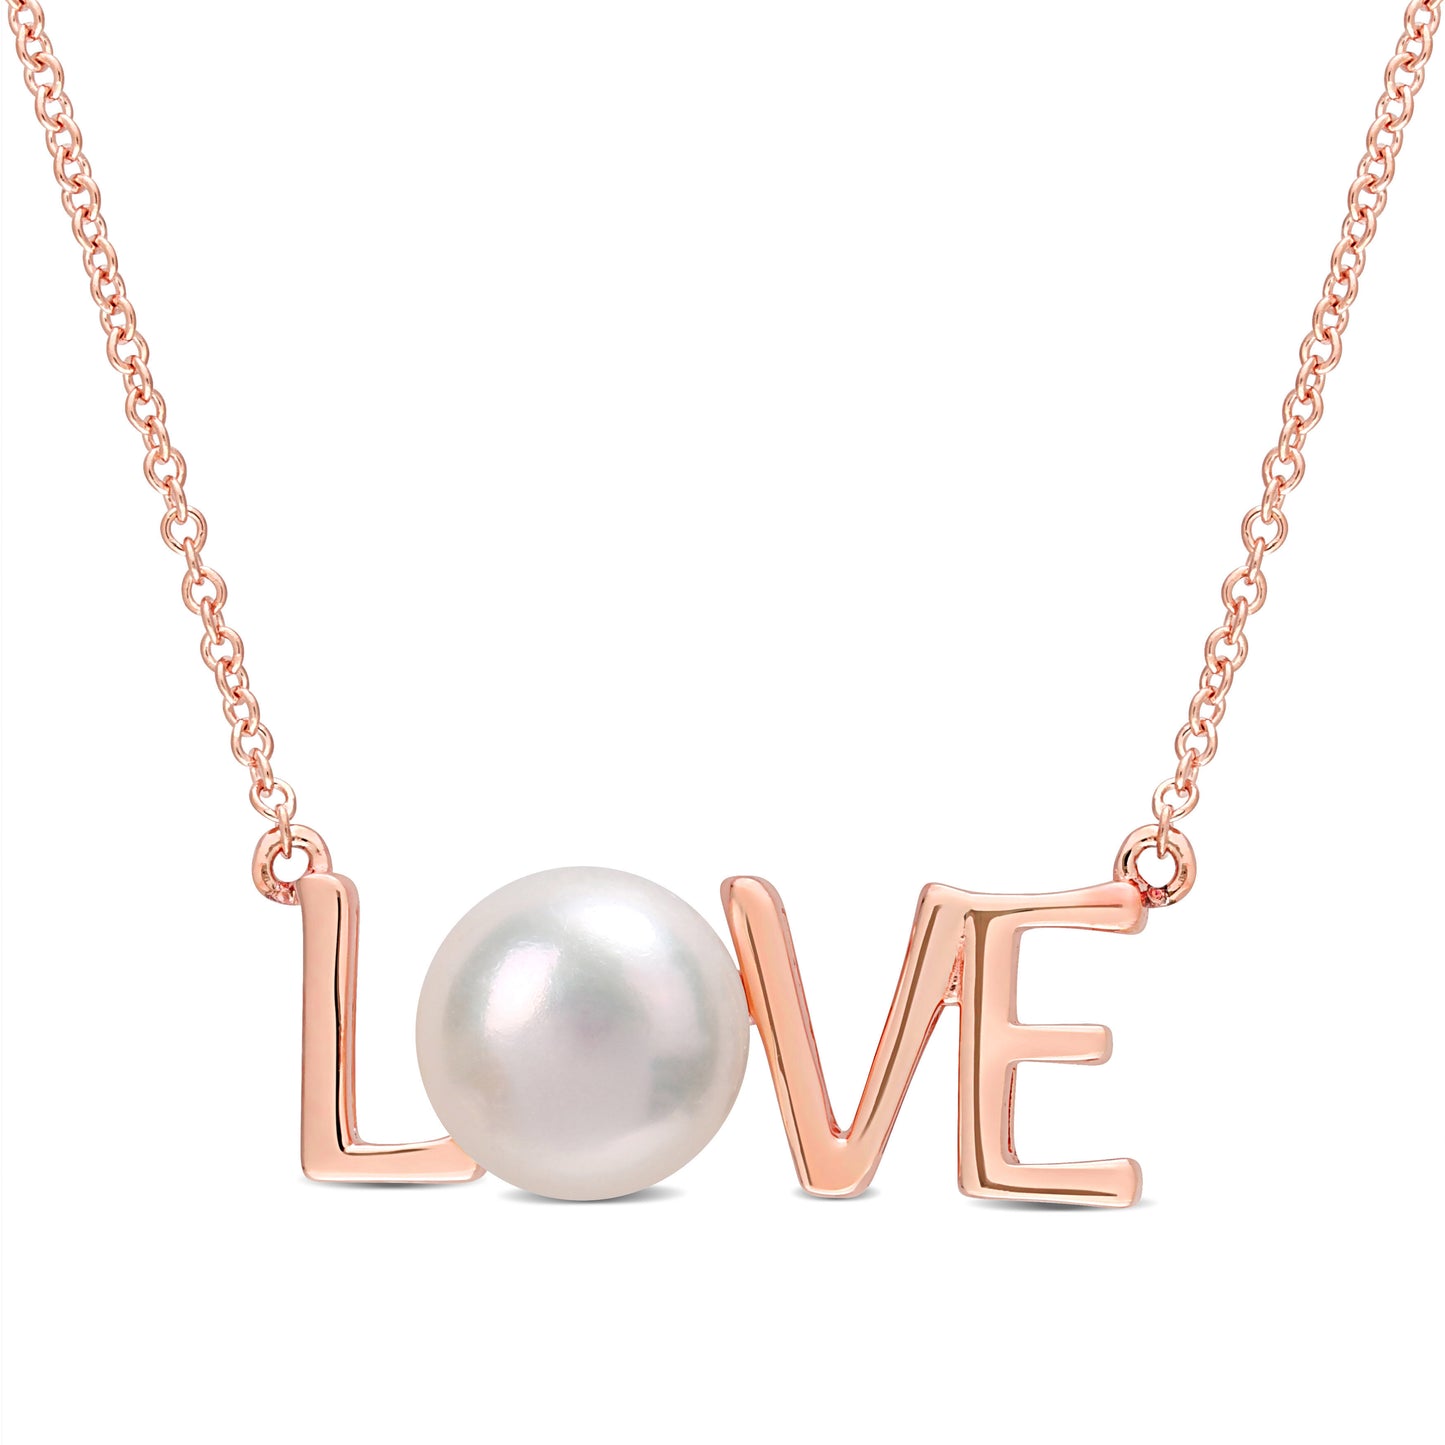 Pearl "LOVE" Necklace in 10k Rose Gold